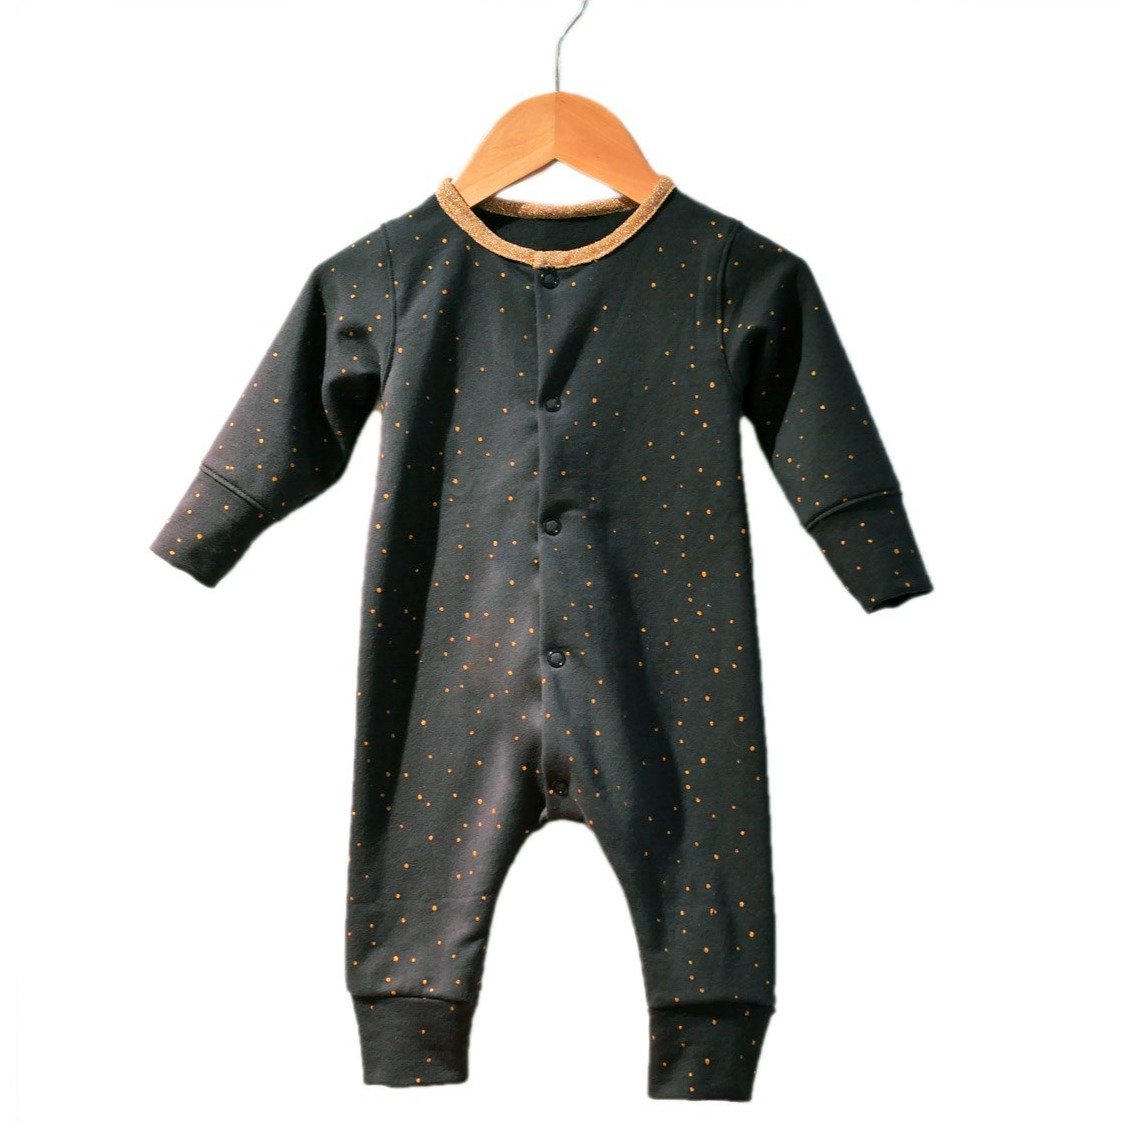 Ikatee - LISBOA jumpsuit / playsuit - Baby 6M/4Y - Paper Sewing Pattern